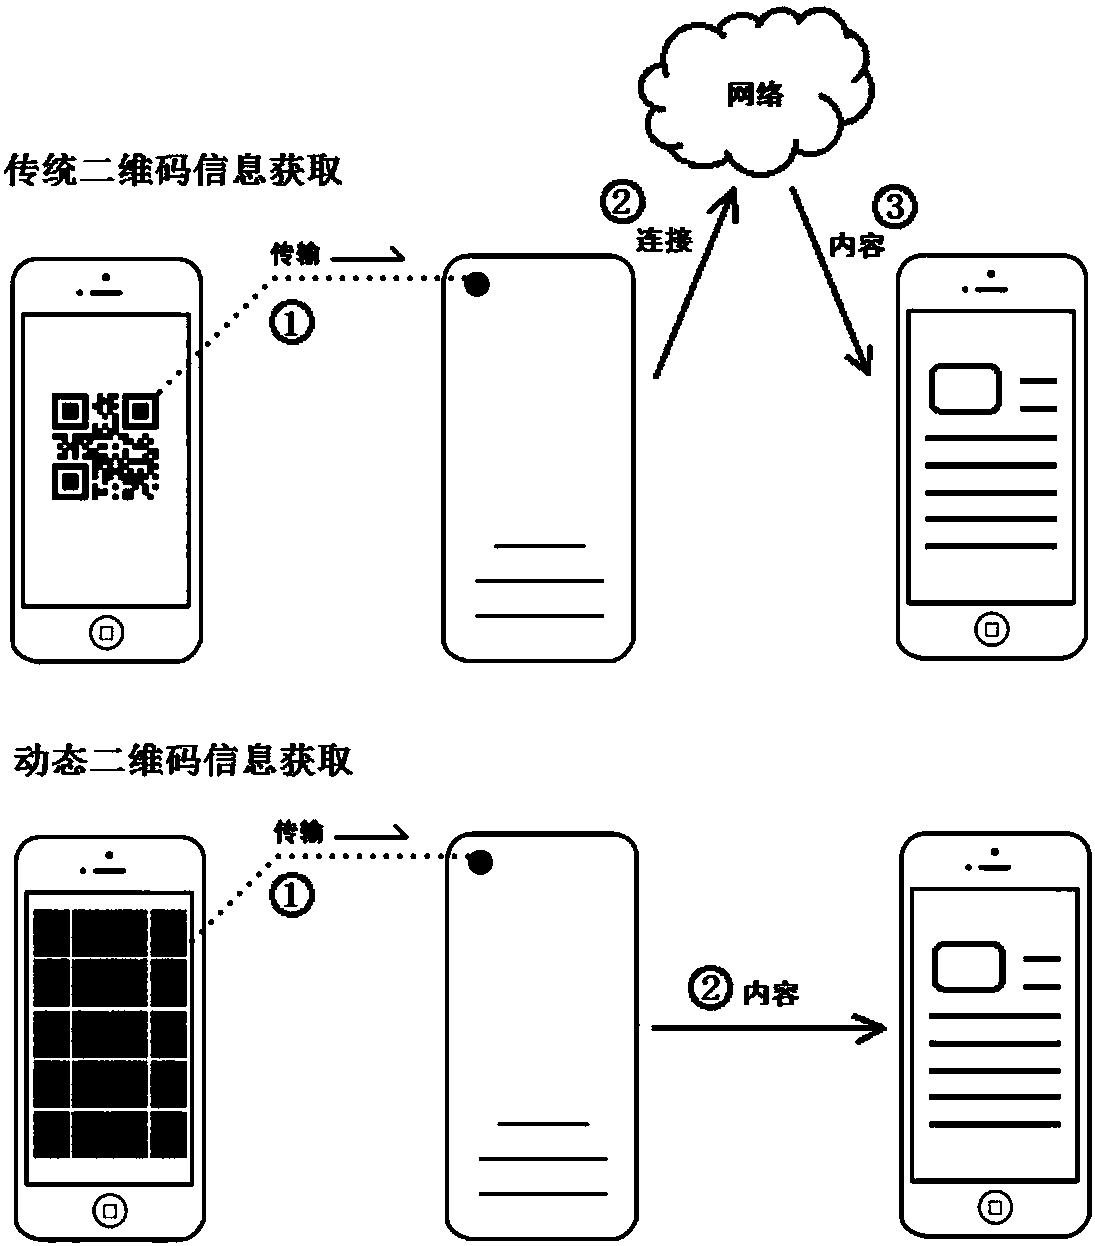 Augmented reality content transmission method and system